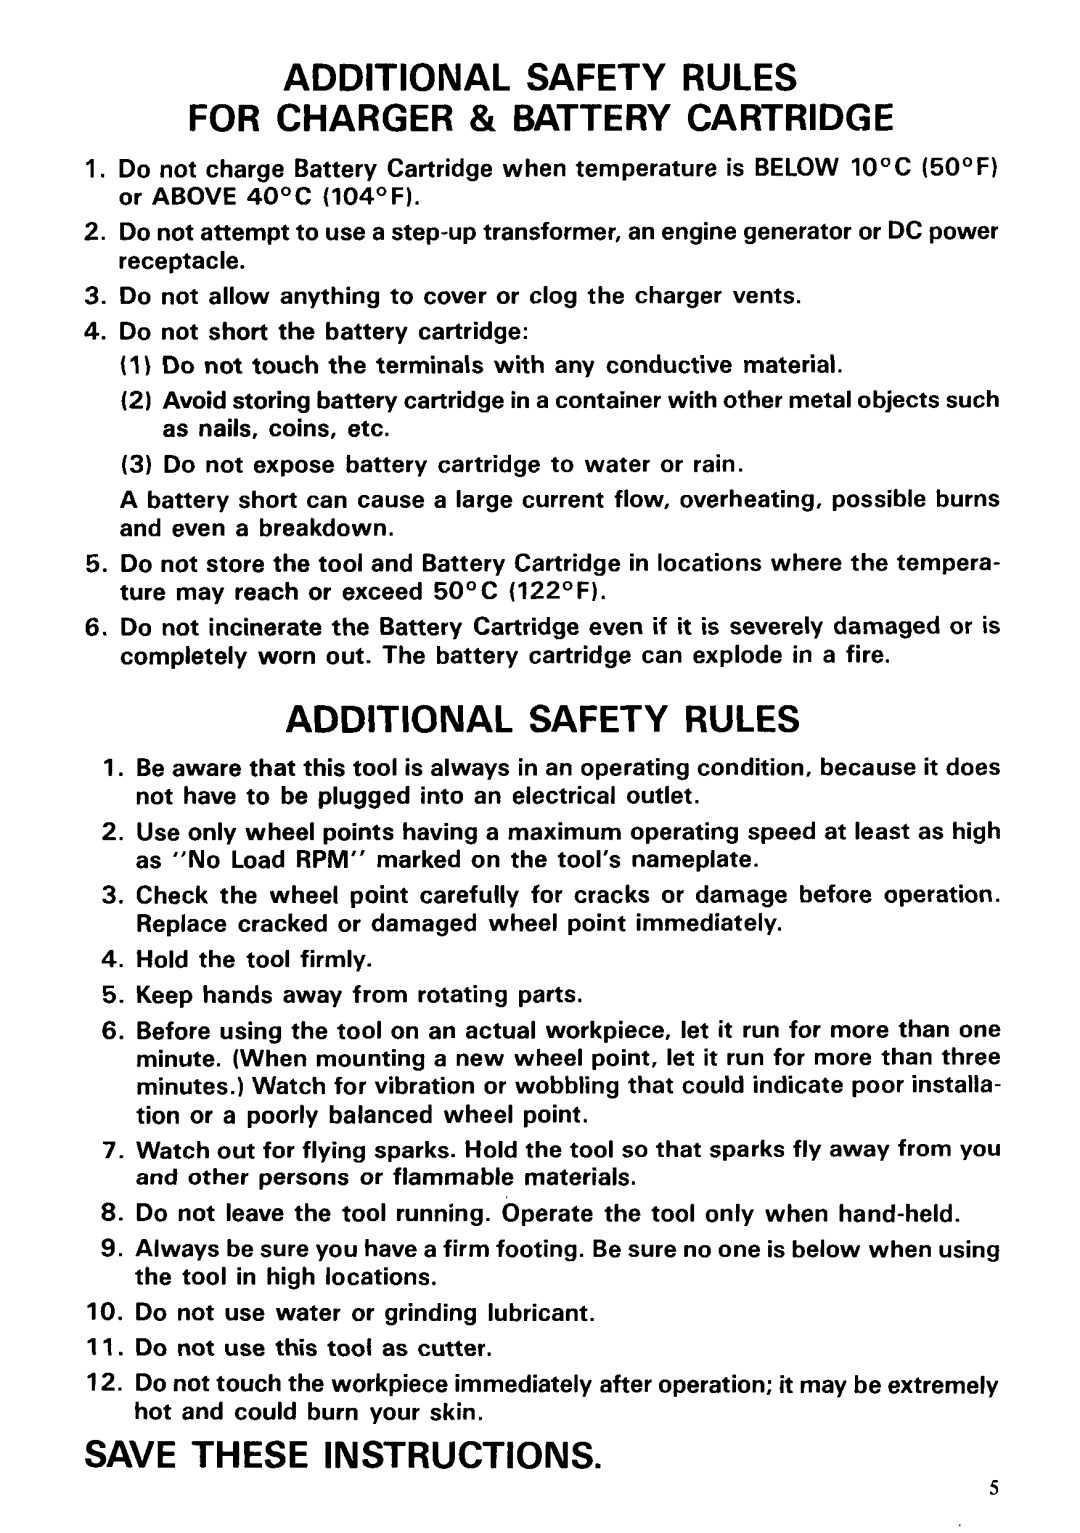 Makita 903DW instruction manual Additional Safety Rules For Charger & Battery Cartridge, Save These Instructions 